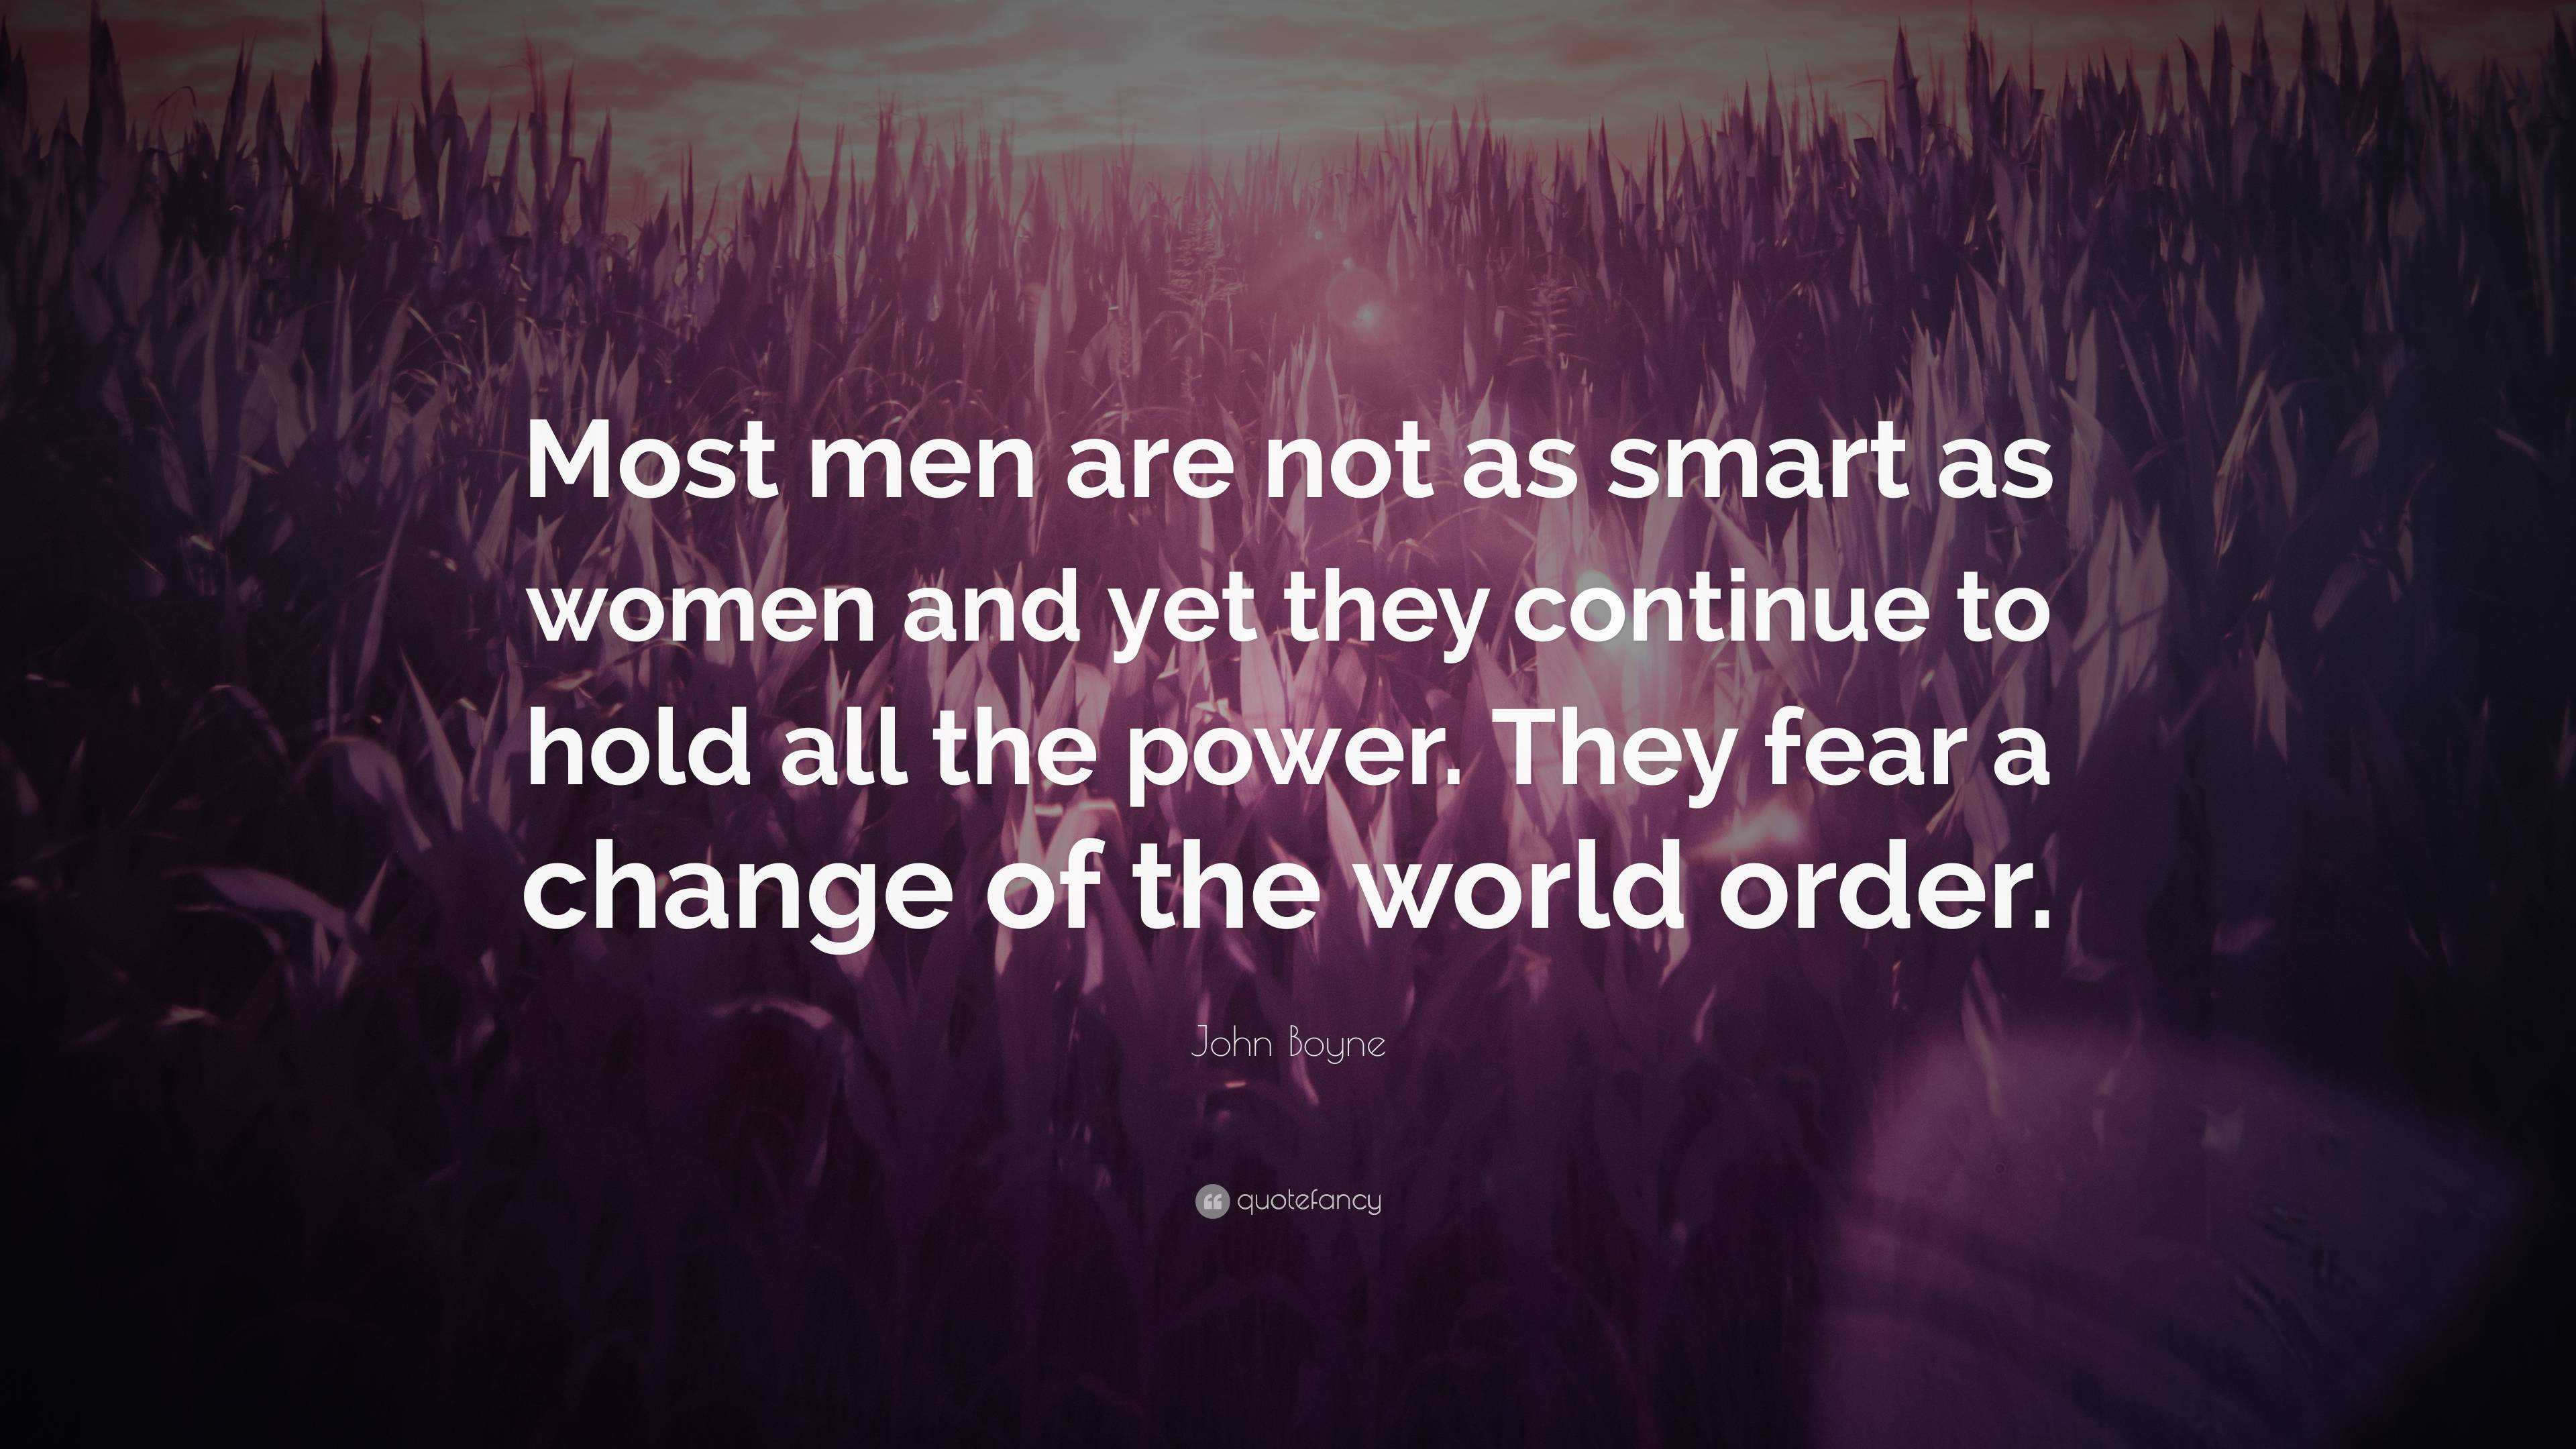 Powerful Women and the Men Who Fear Them